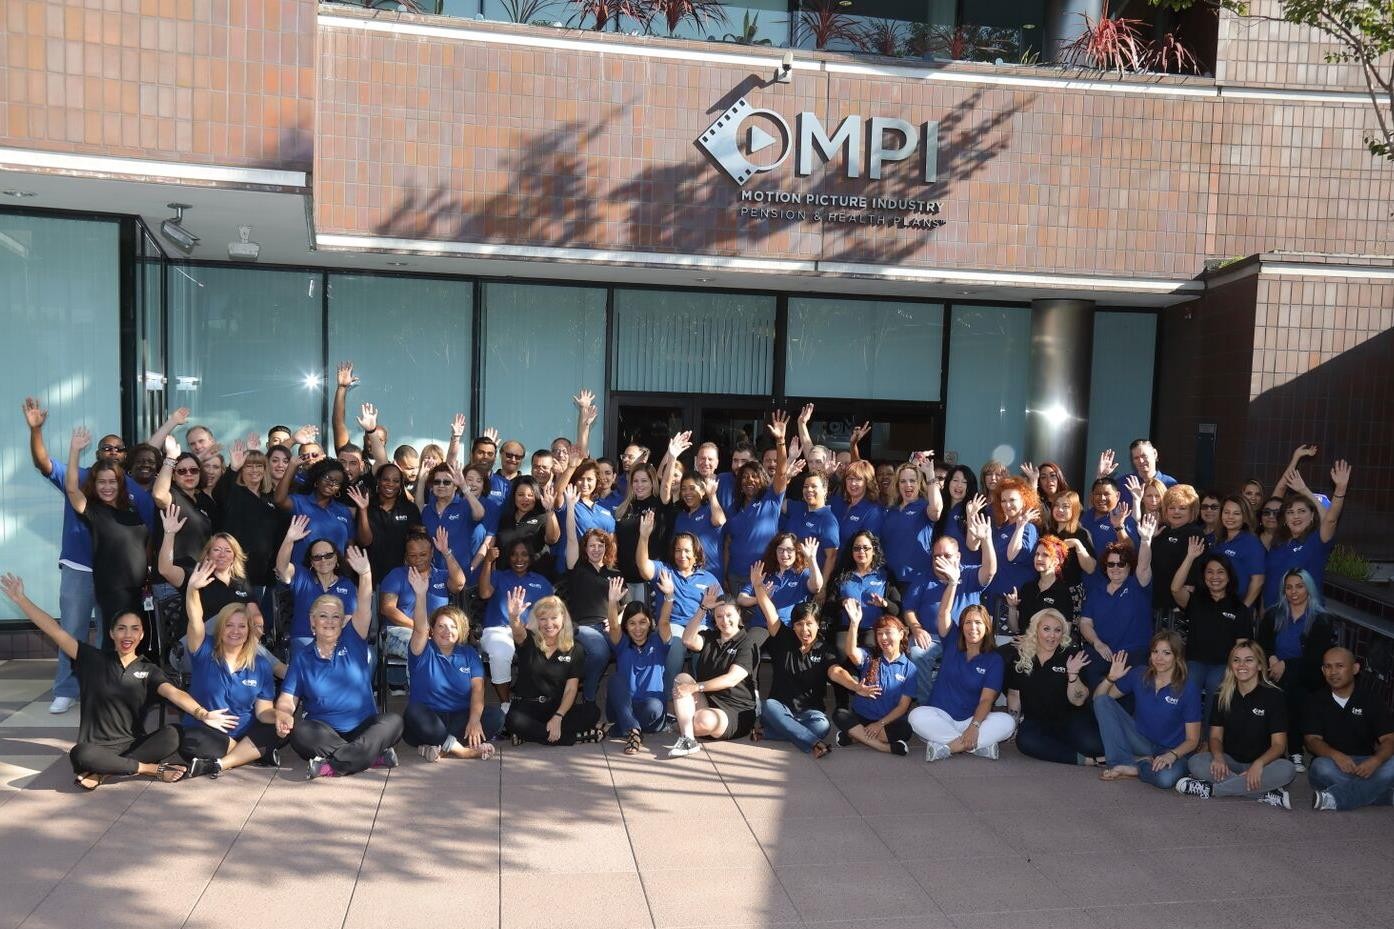 Employees sporting their MPI-branded gear in the courtyard in front of the Studio City, CA office.